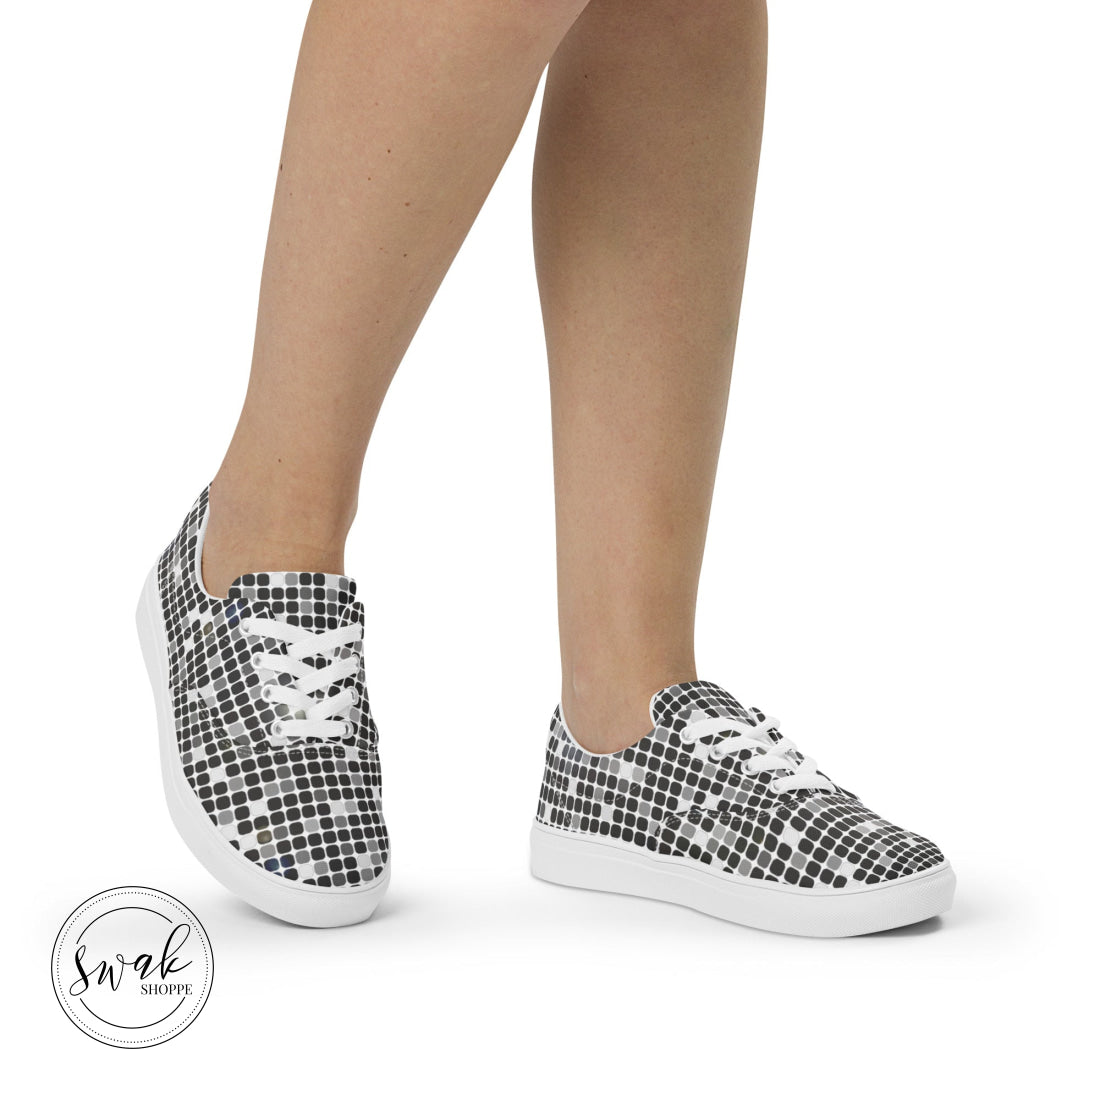 Mirrorball Disco Ball Womens Lace-Up Canvas Shoes